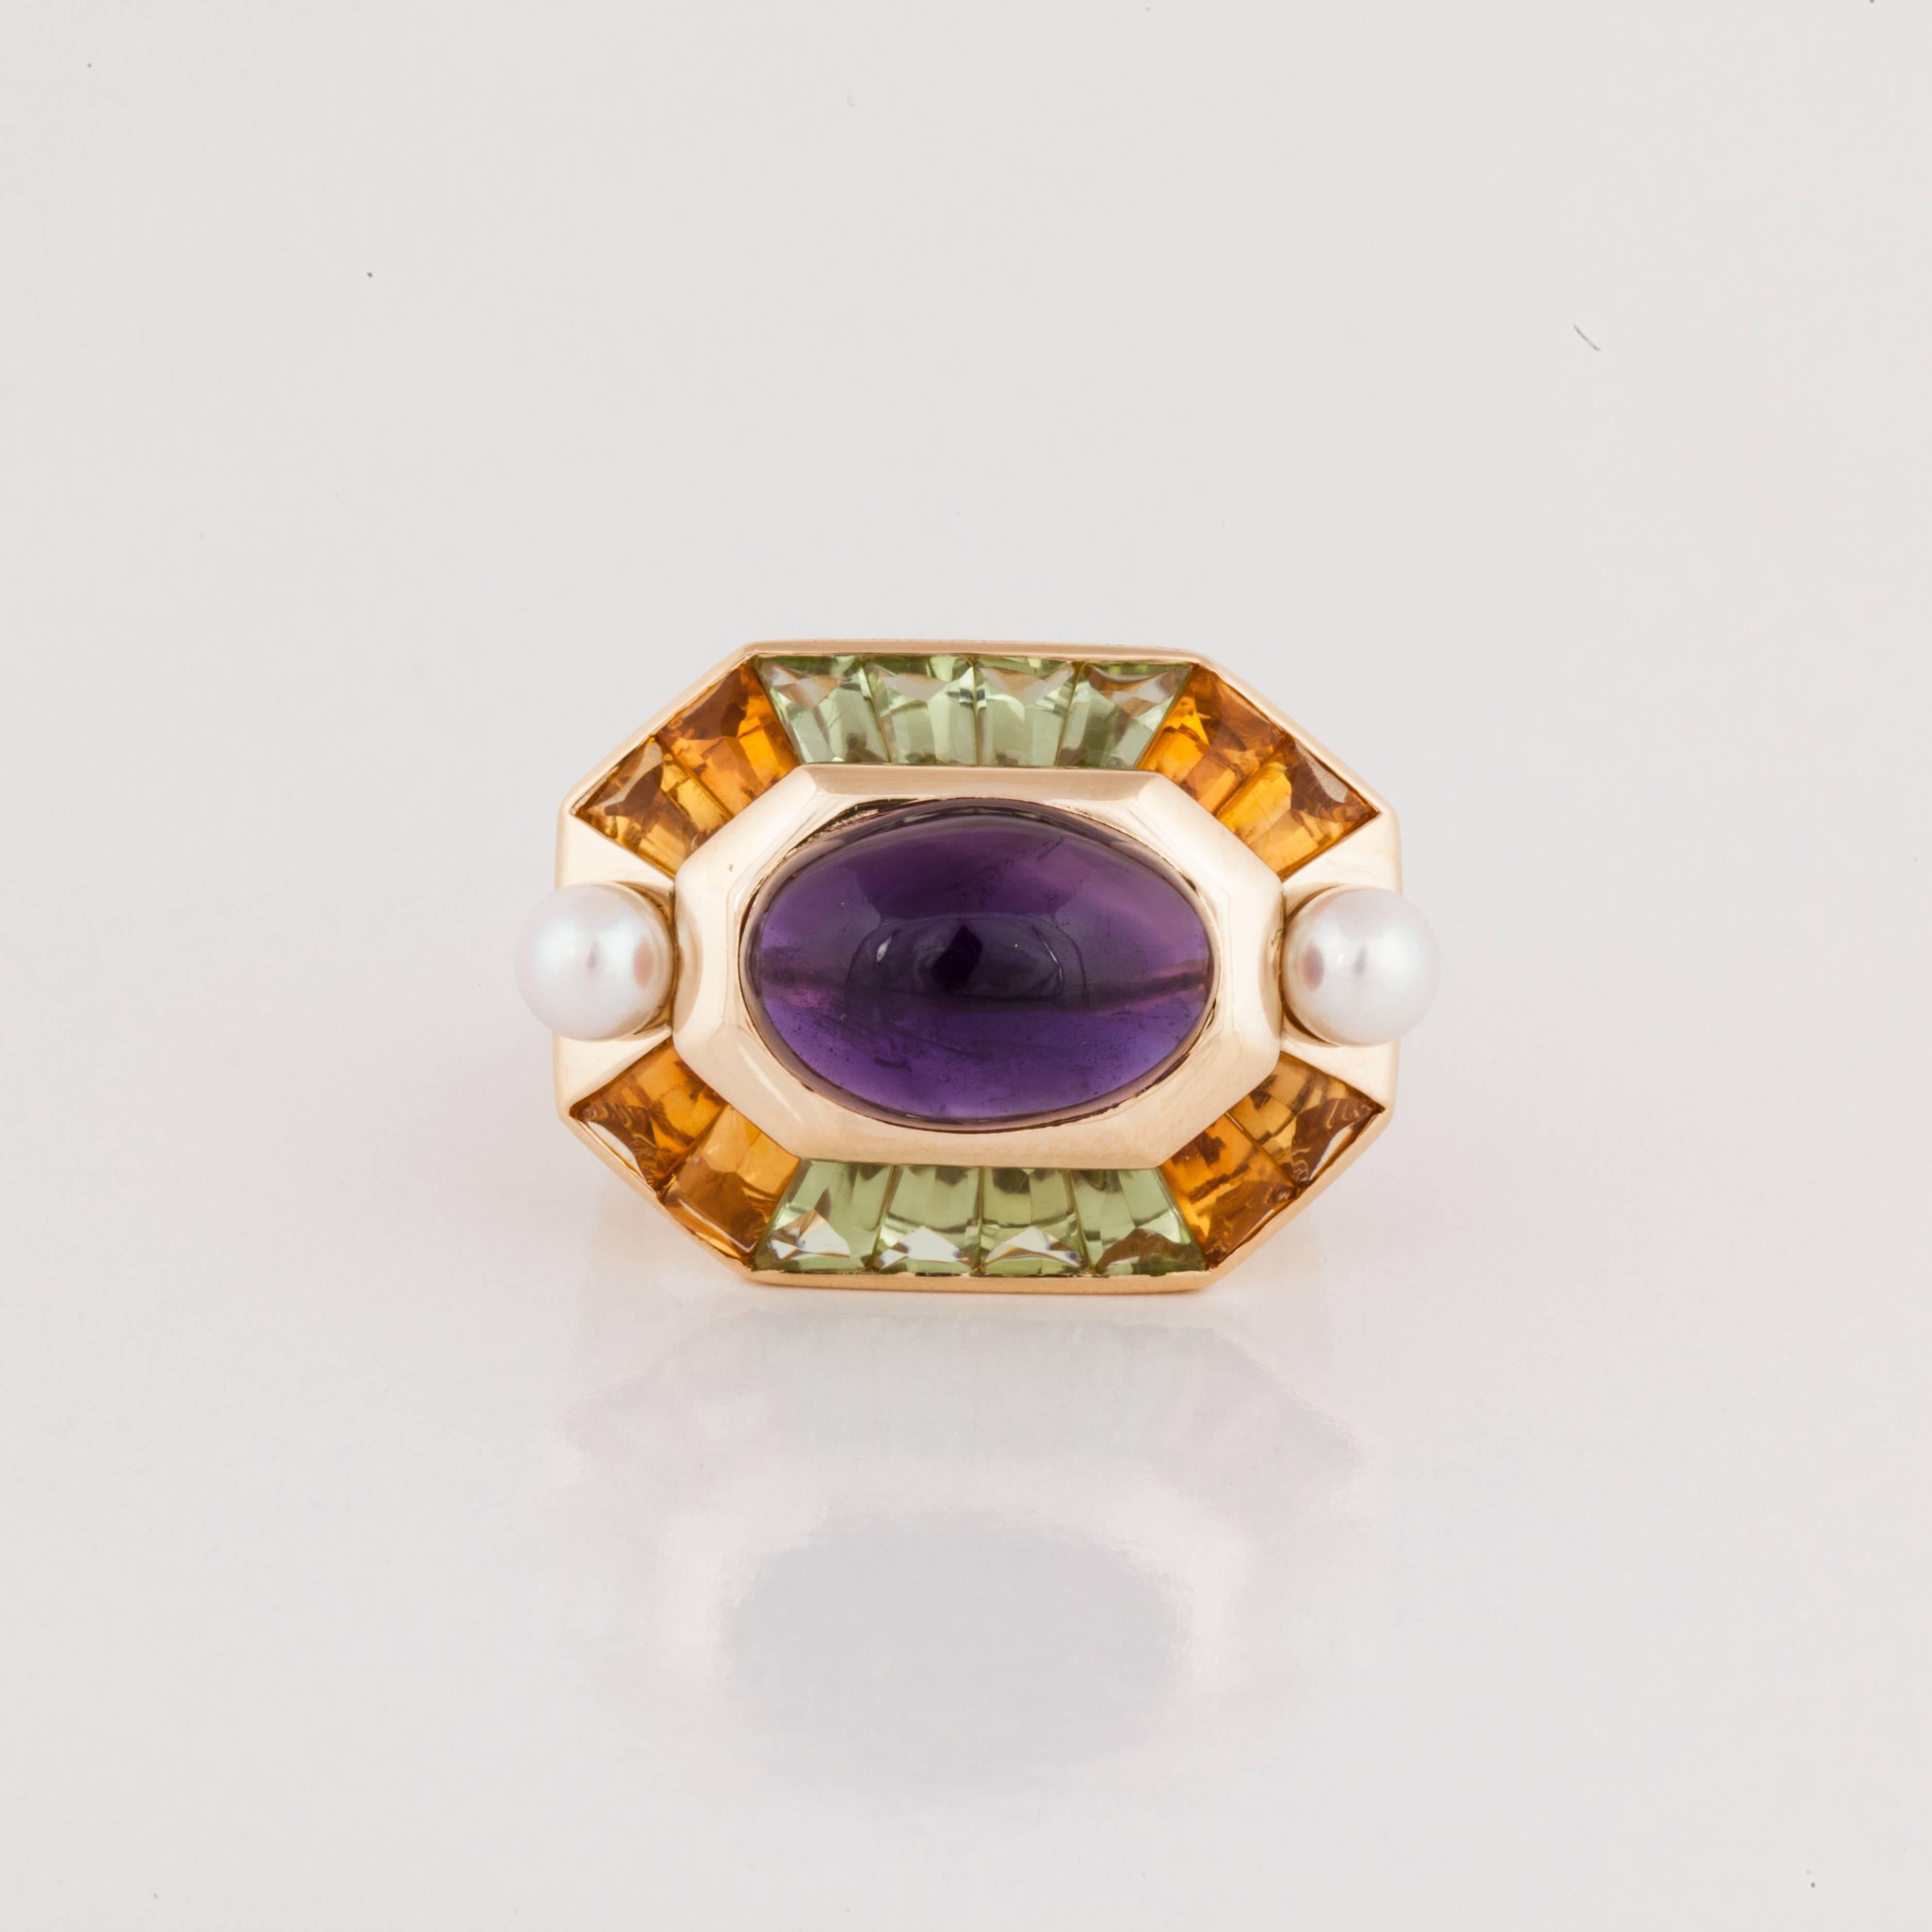 Chanel gemstone and pearl ring in 18K yellow gold, marked 